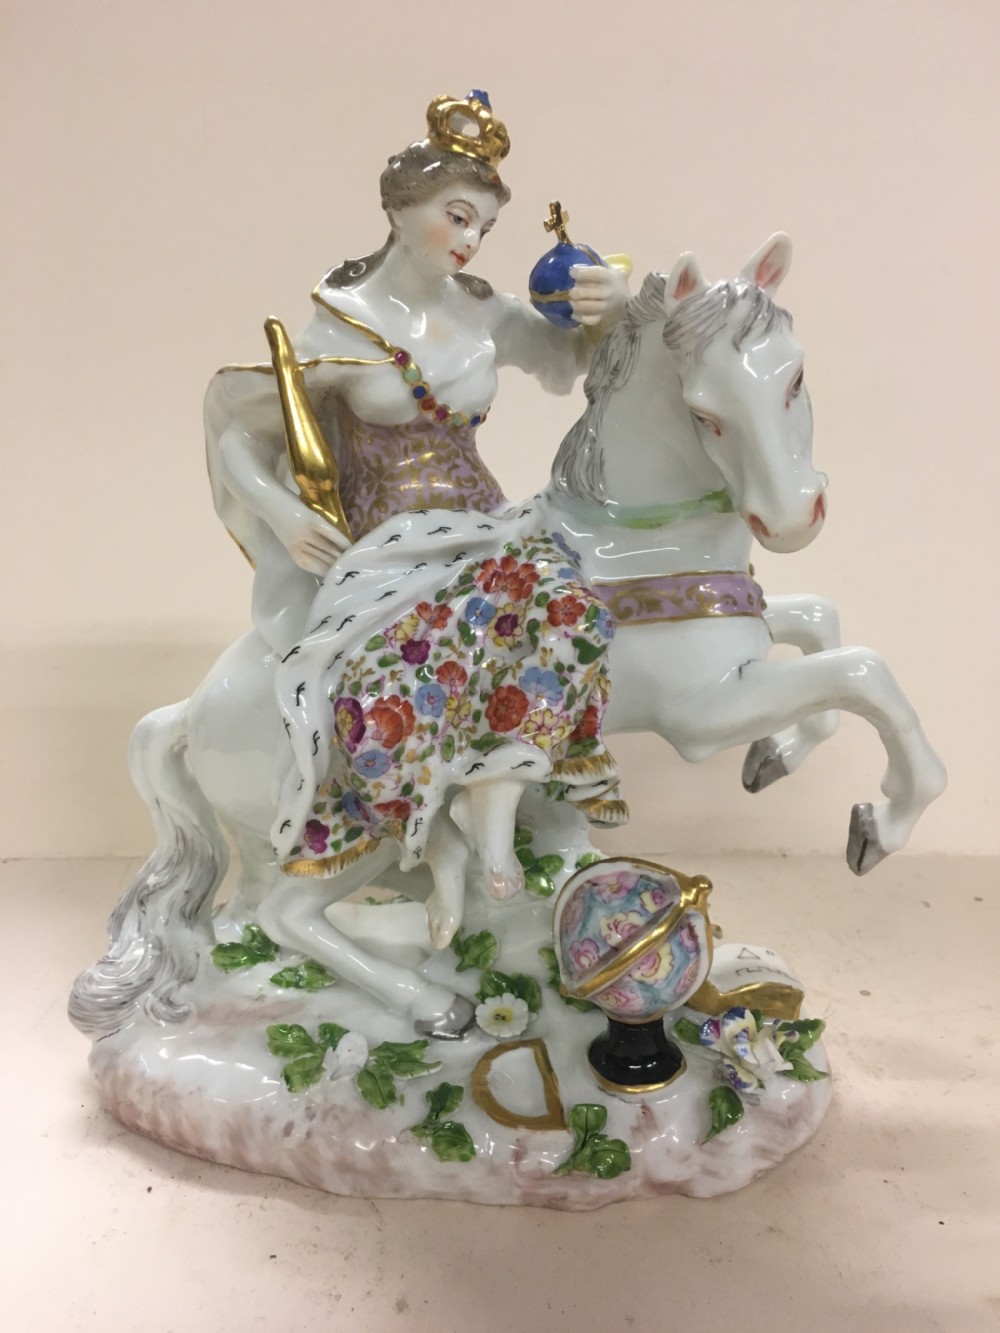 c19th porcelain figure of catherine the great